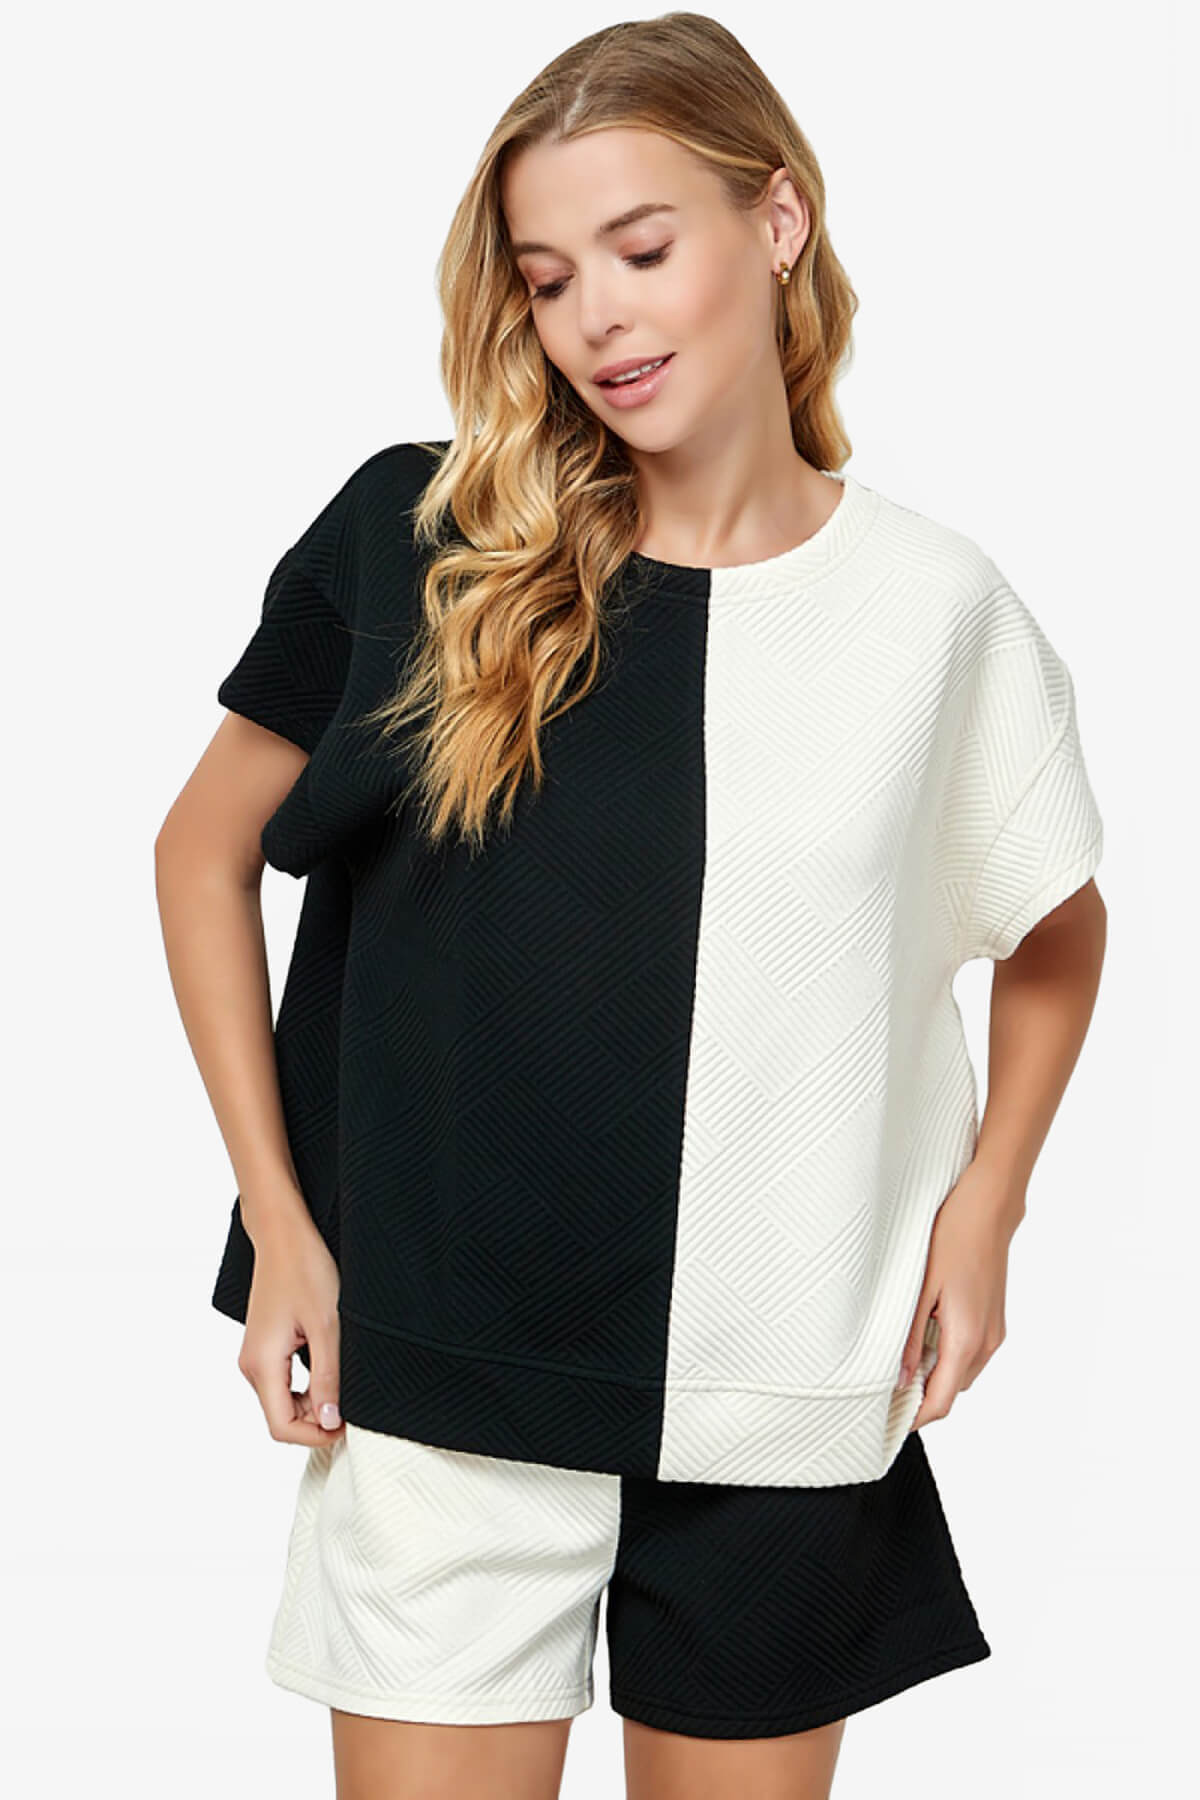 Load image into Gallery viewer, Lassy Textured Colorblock Short Sleeve Top BLACK AND WHITE_1
